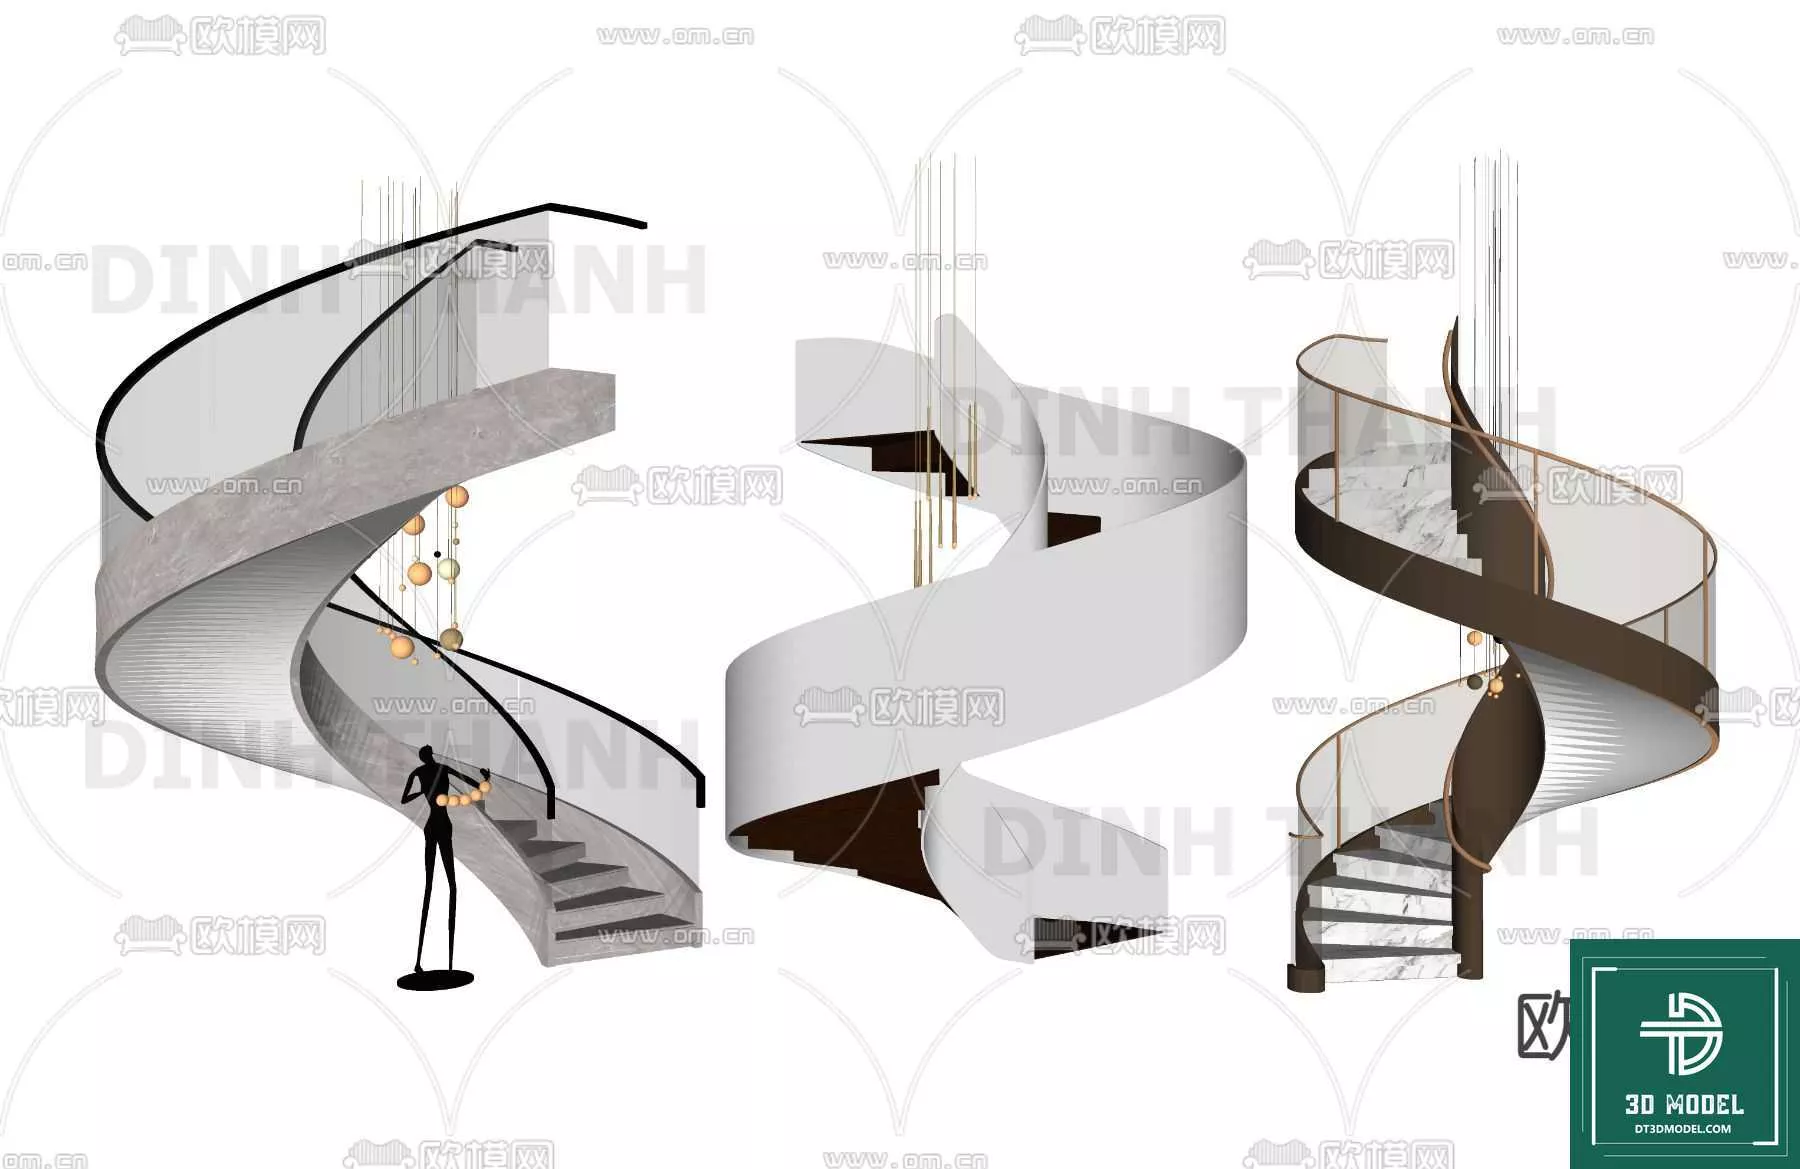 MODERN STAIR - SKETCHUP 3D MODEL - VRAY OR ENSCAPE - ID14136